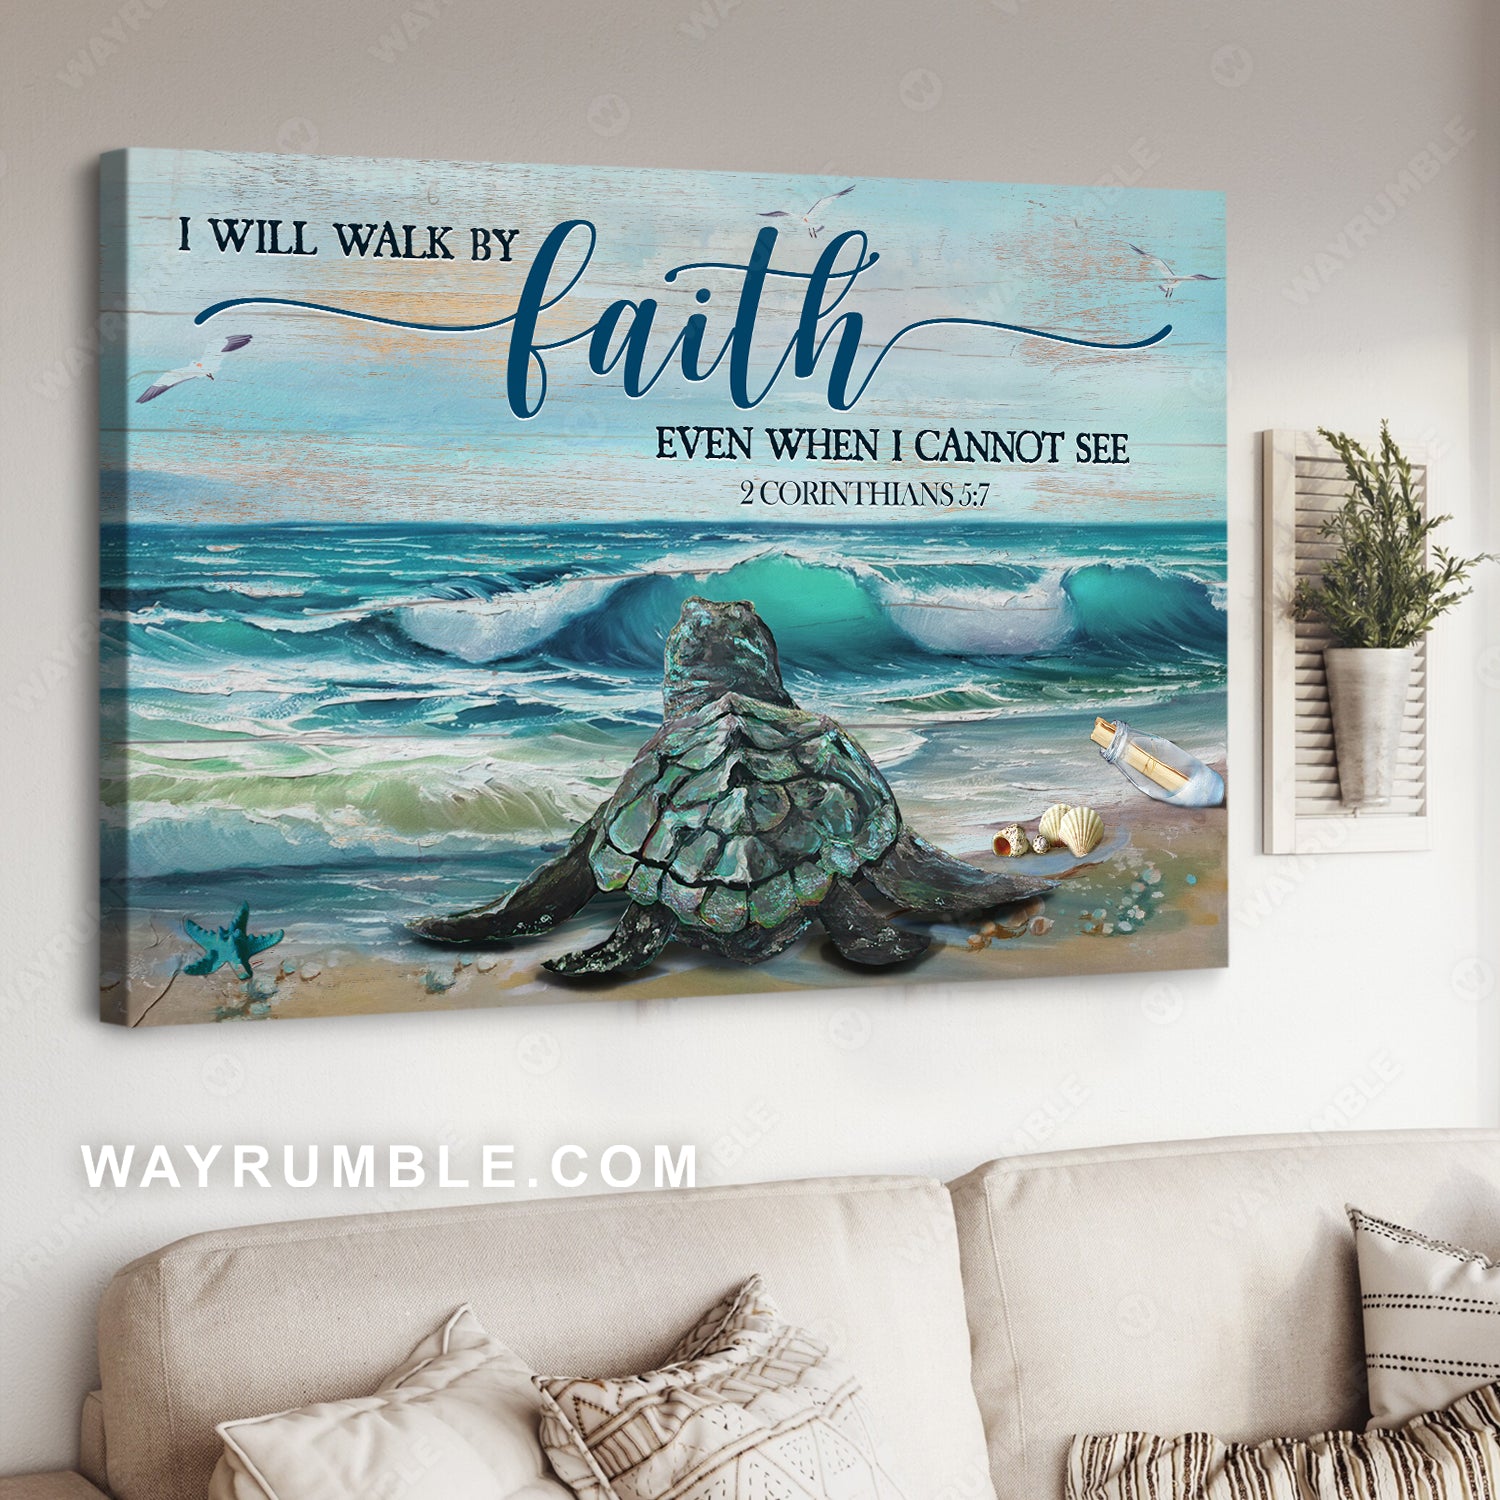 Big sea turtle, Blue ocean drawing, Seagull, I will walk by faith even when I cannot see - Jesus Landscape Canvas Prints, Christian Wall Art